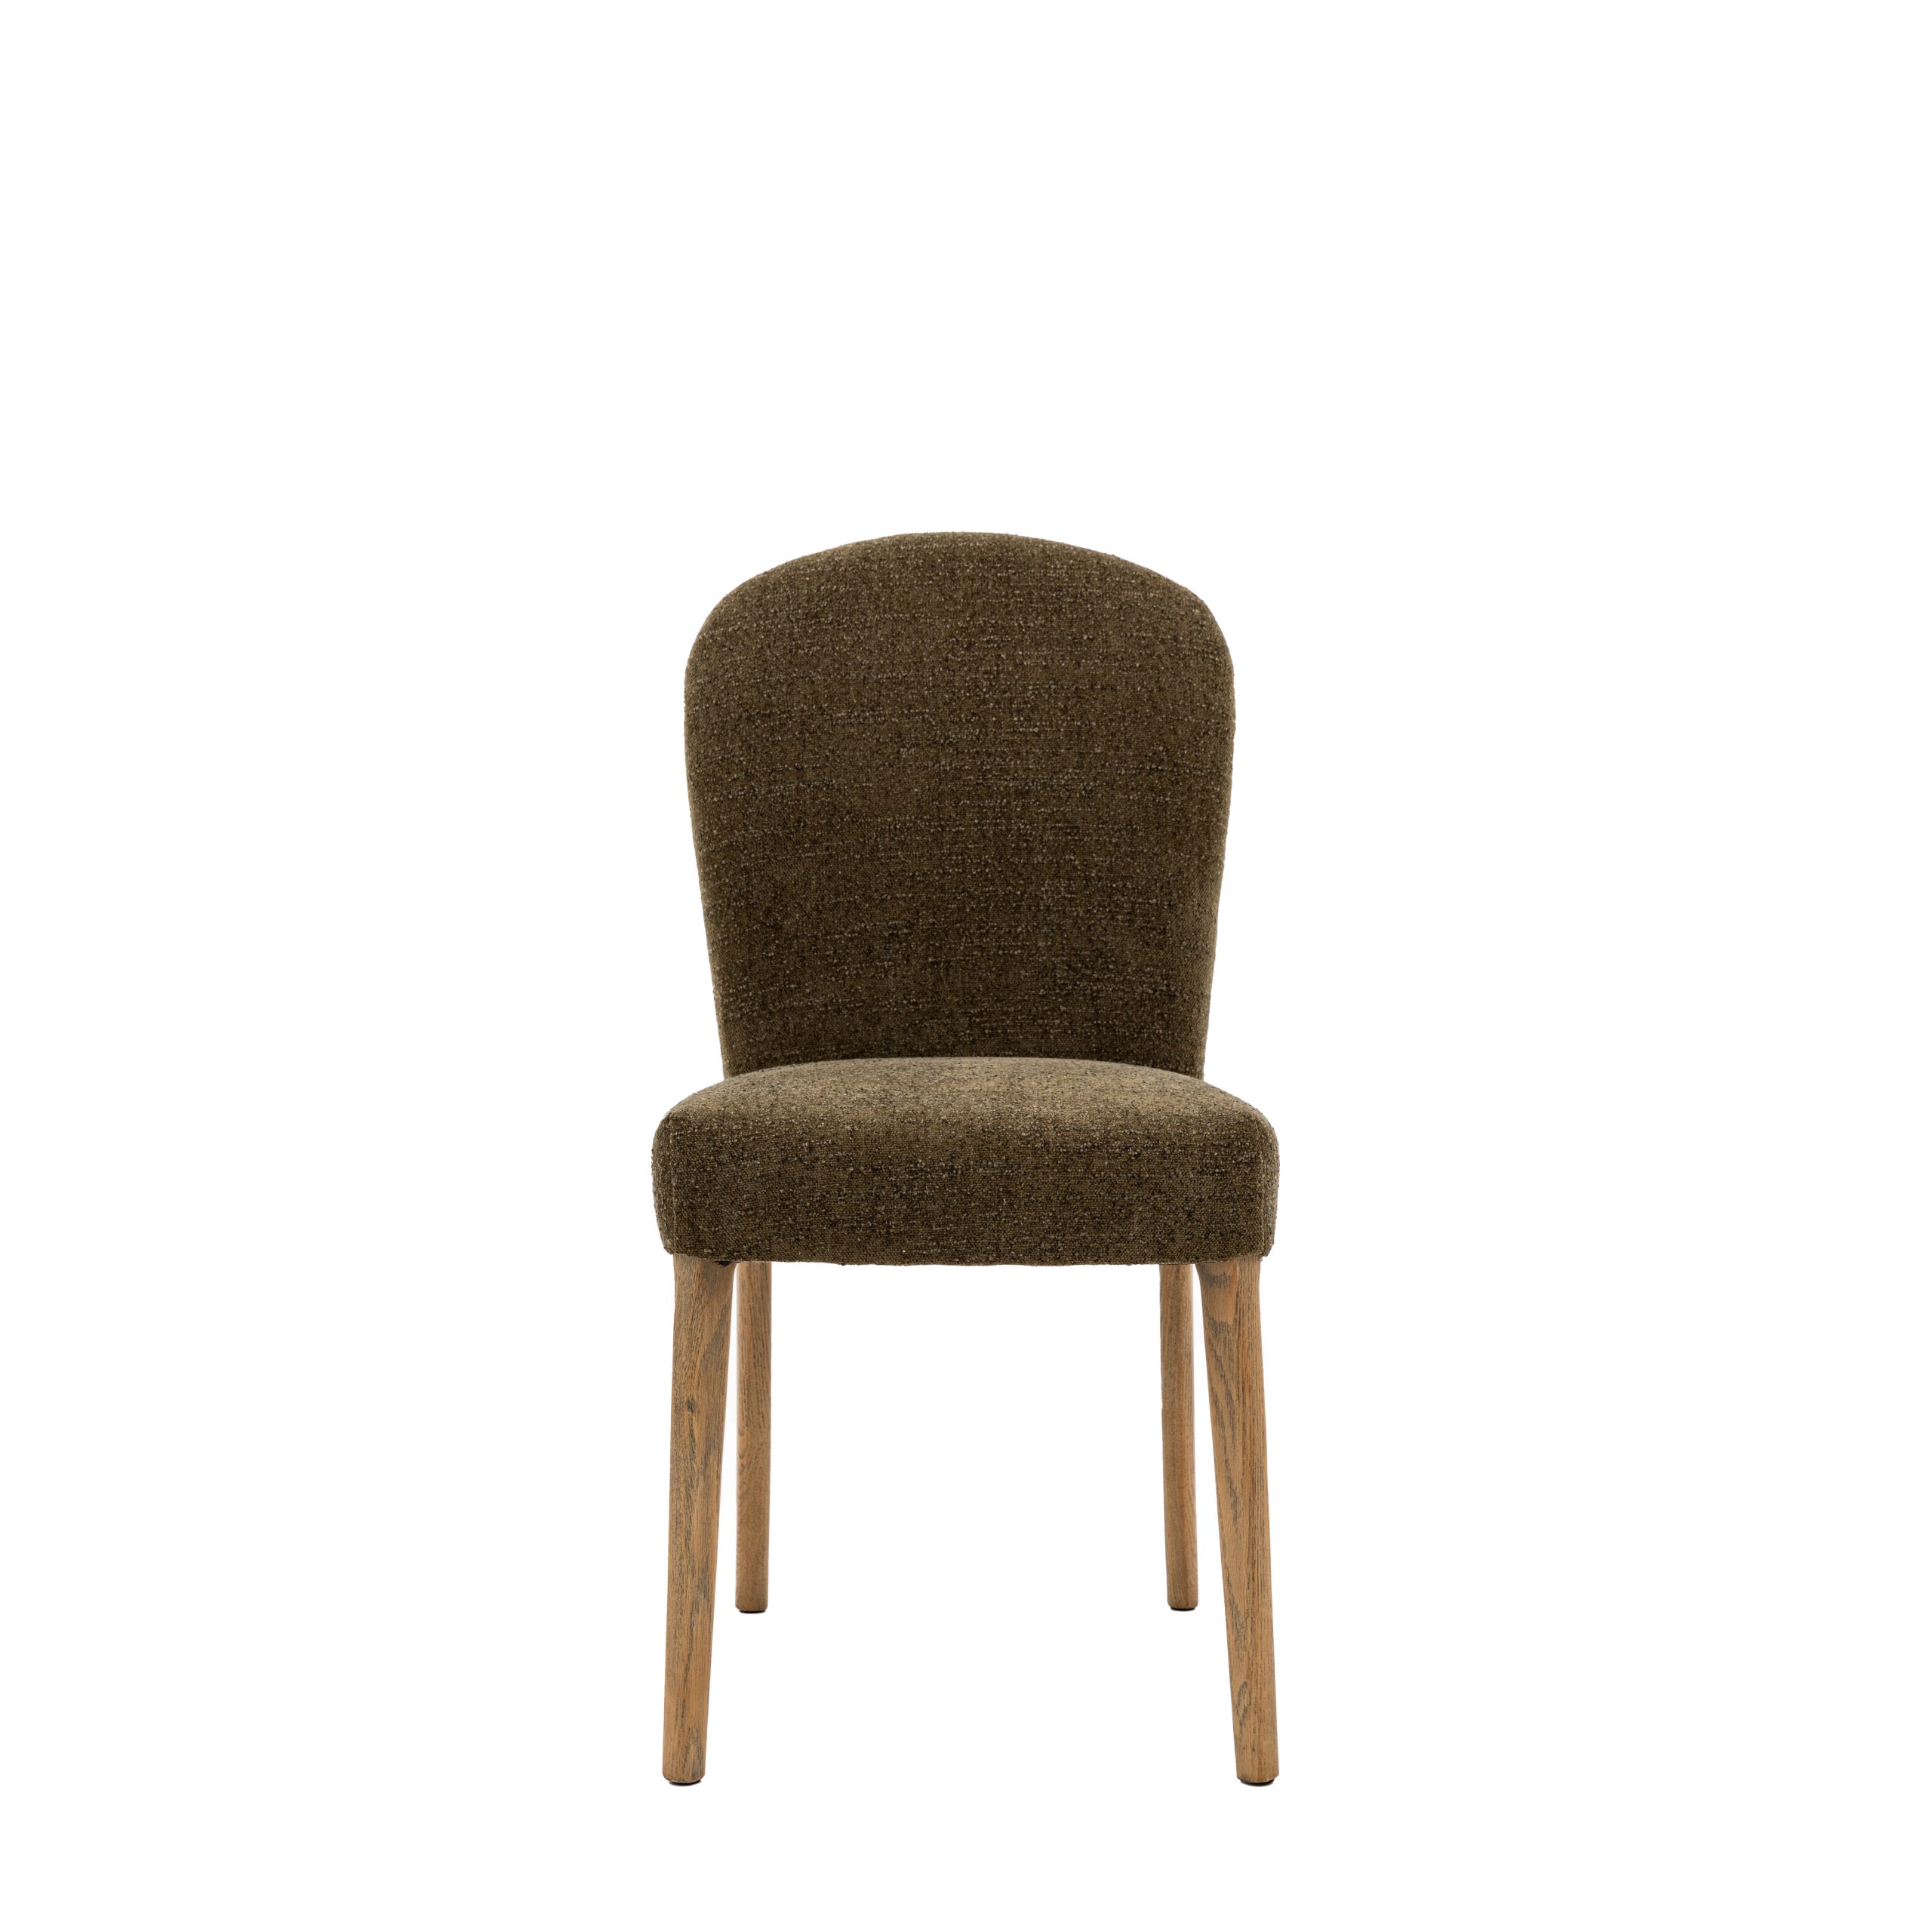 Gallery Direct Hinton Dining Chair Moss Green (Set of 2)